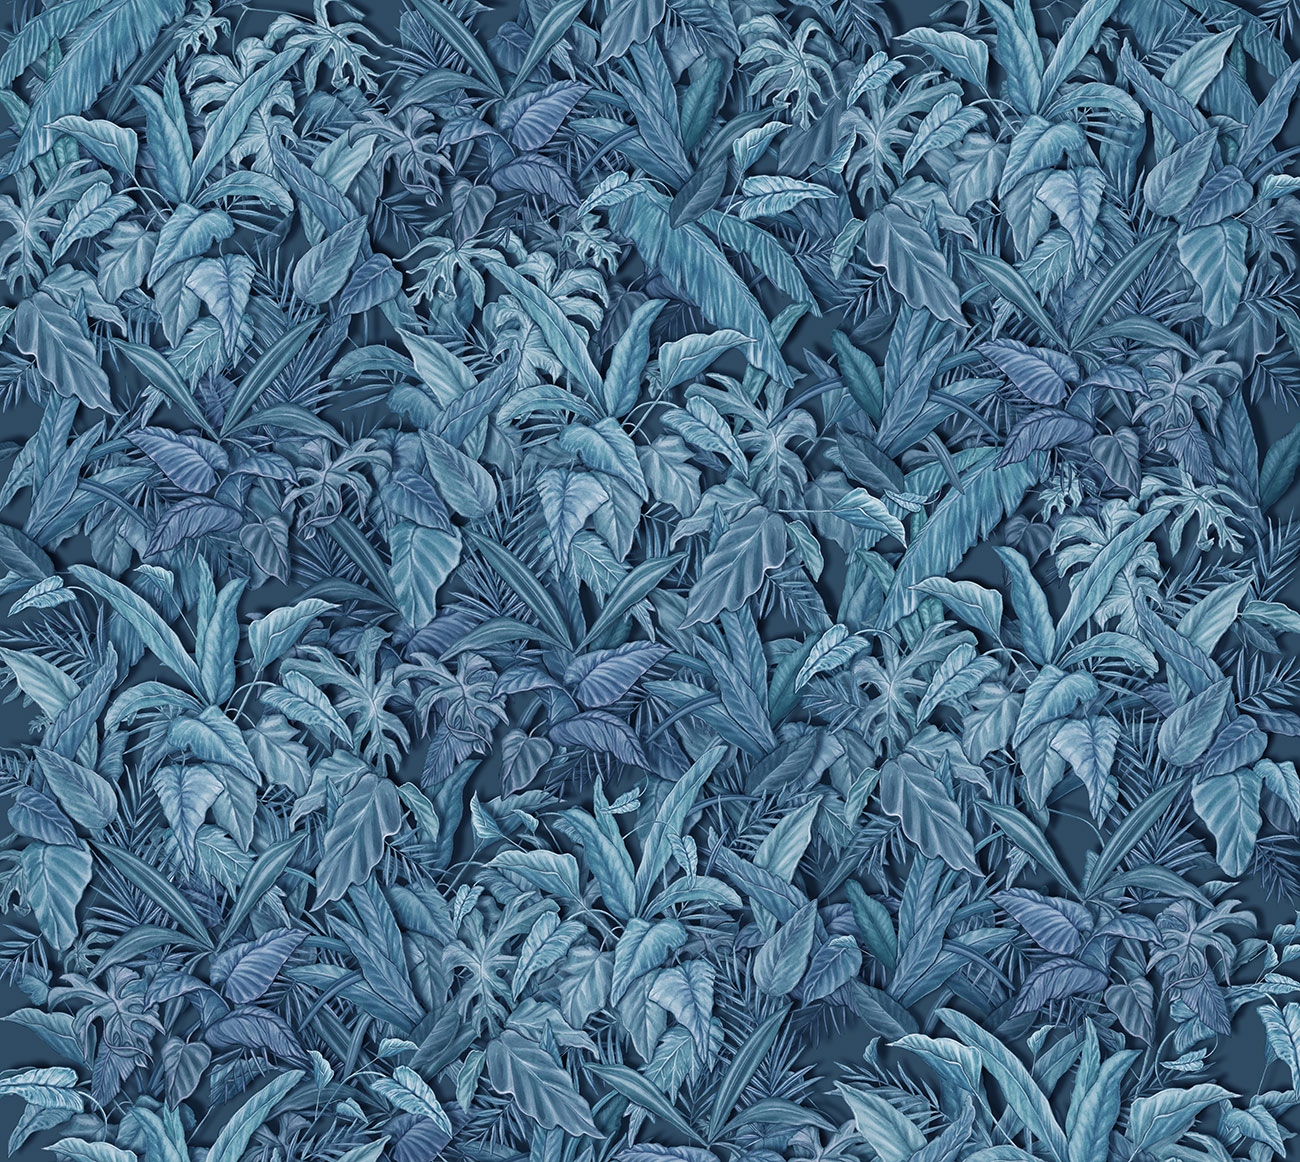 Jungle wallpaper with composition of exotic leaves in various shades of grey